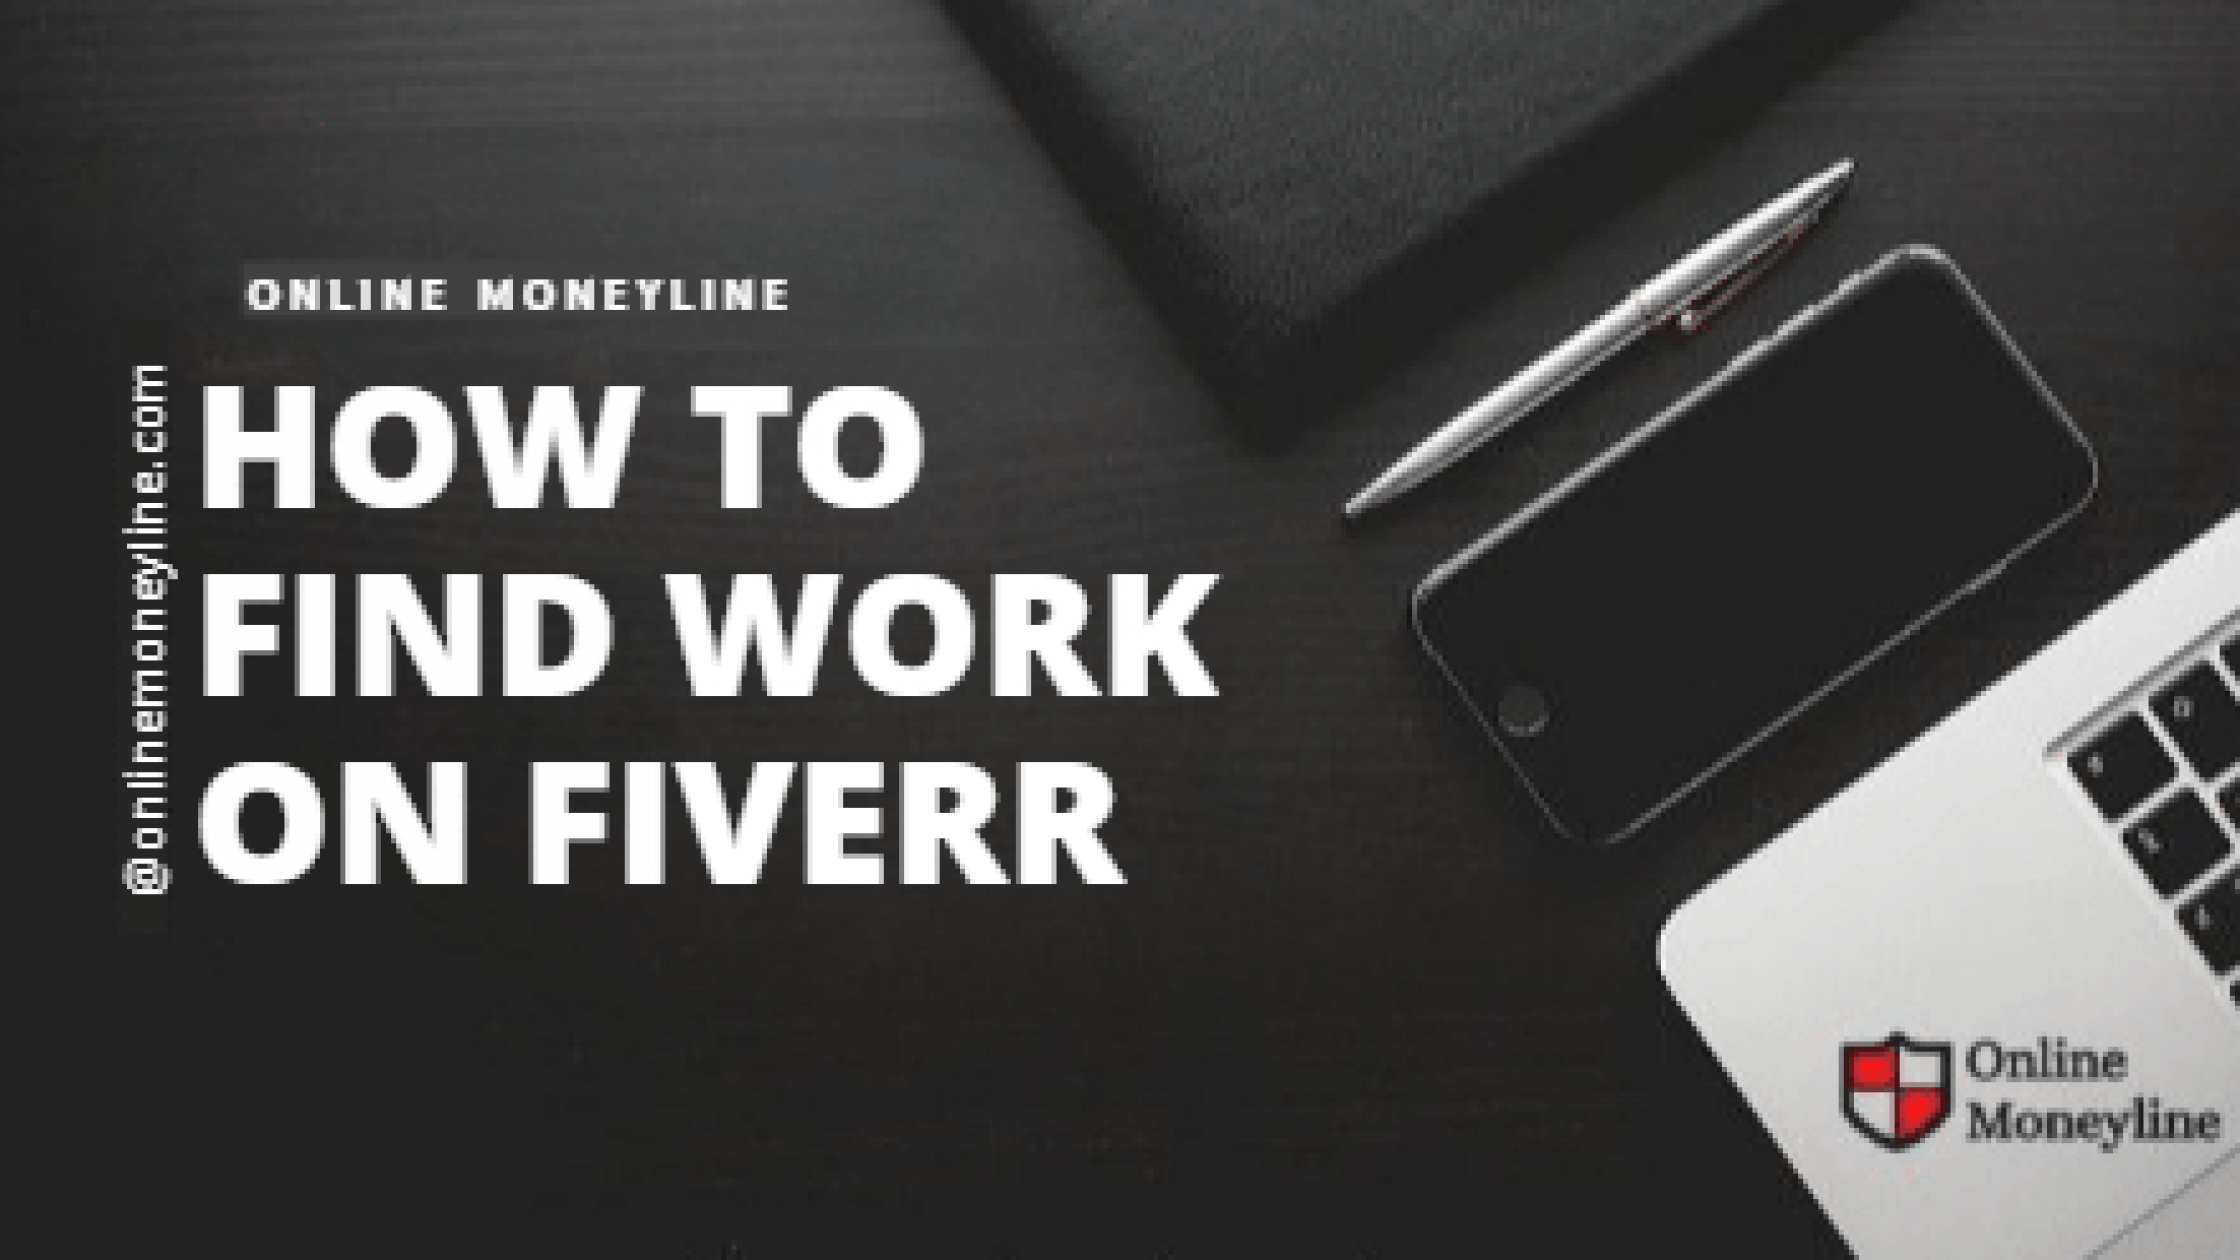 How To Find Work On Fiverr?